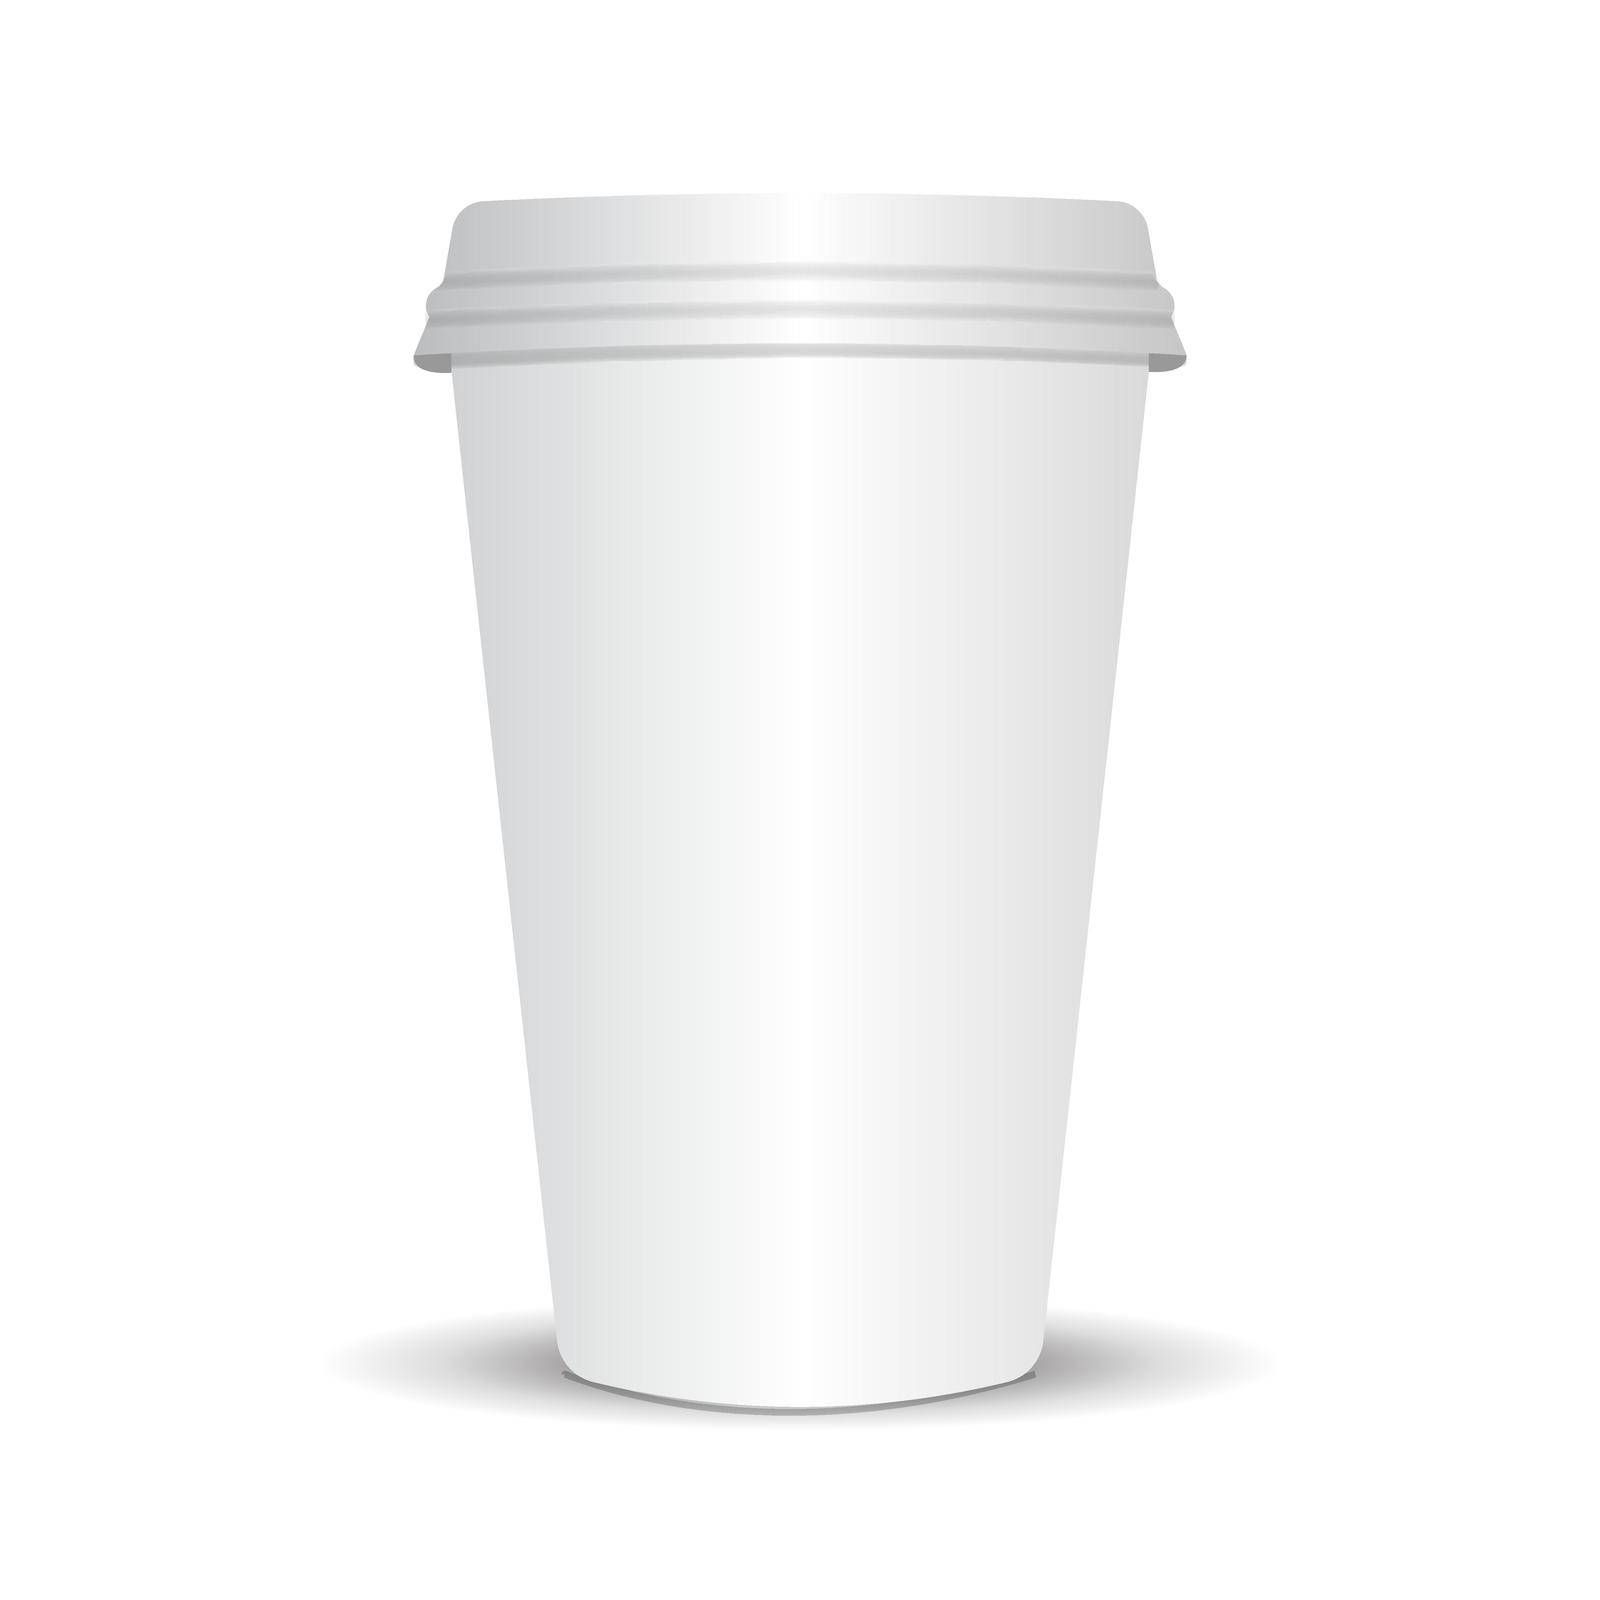 3d Realistic paper coffee cup. Vector illustration.